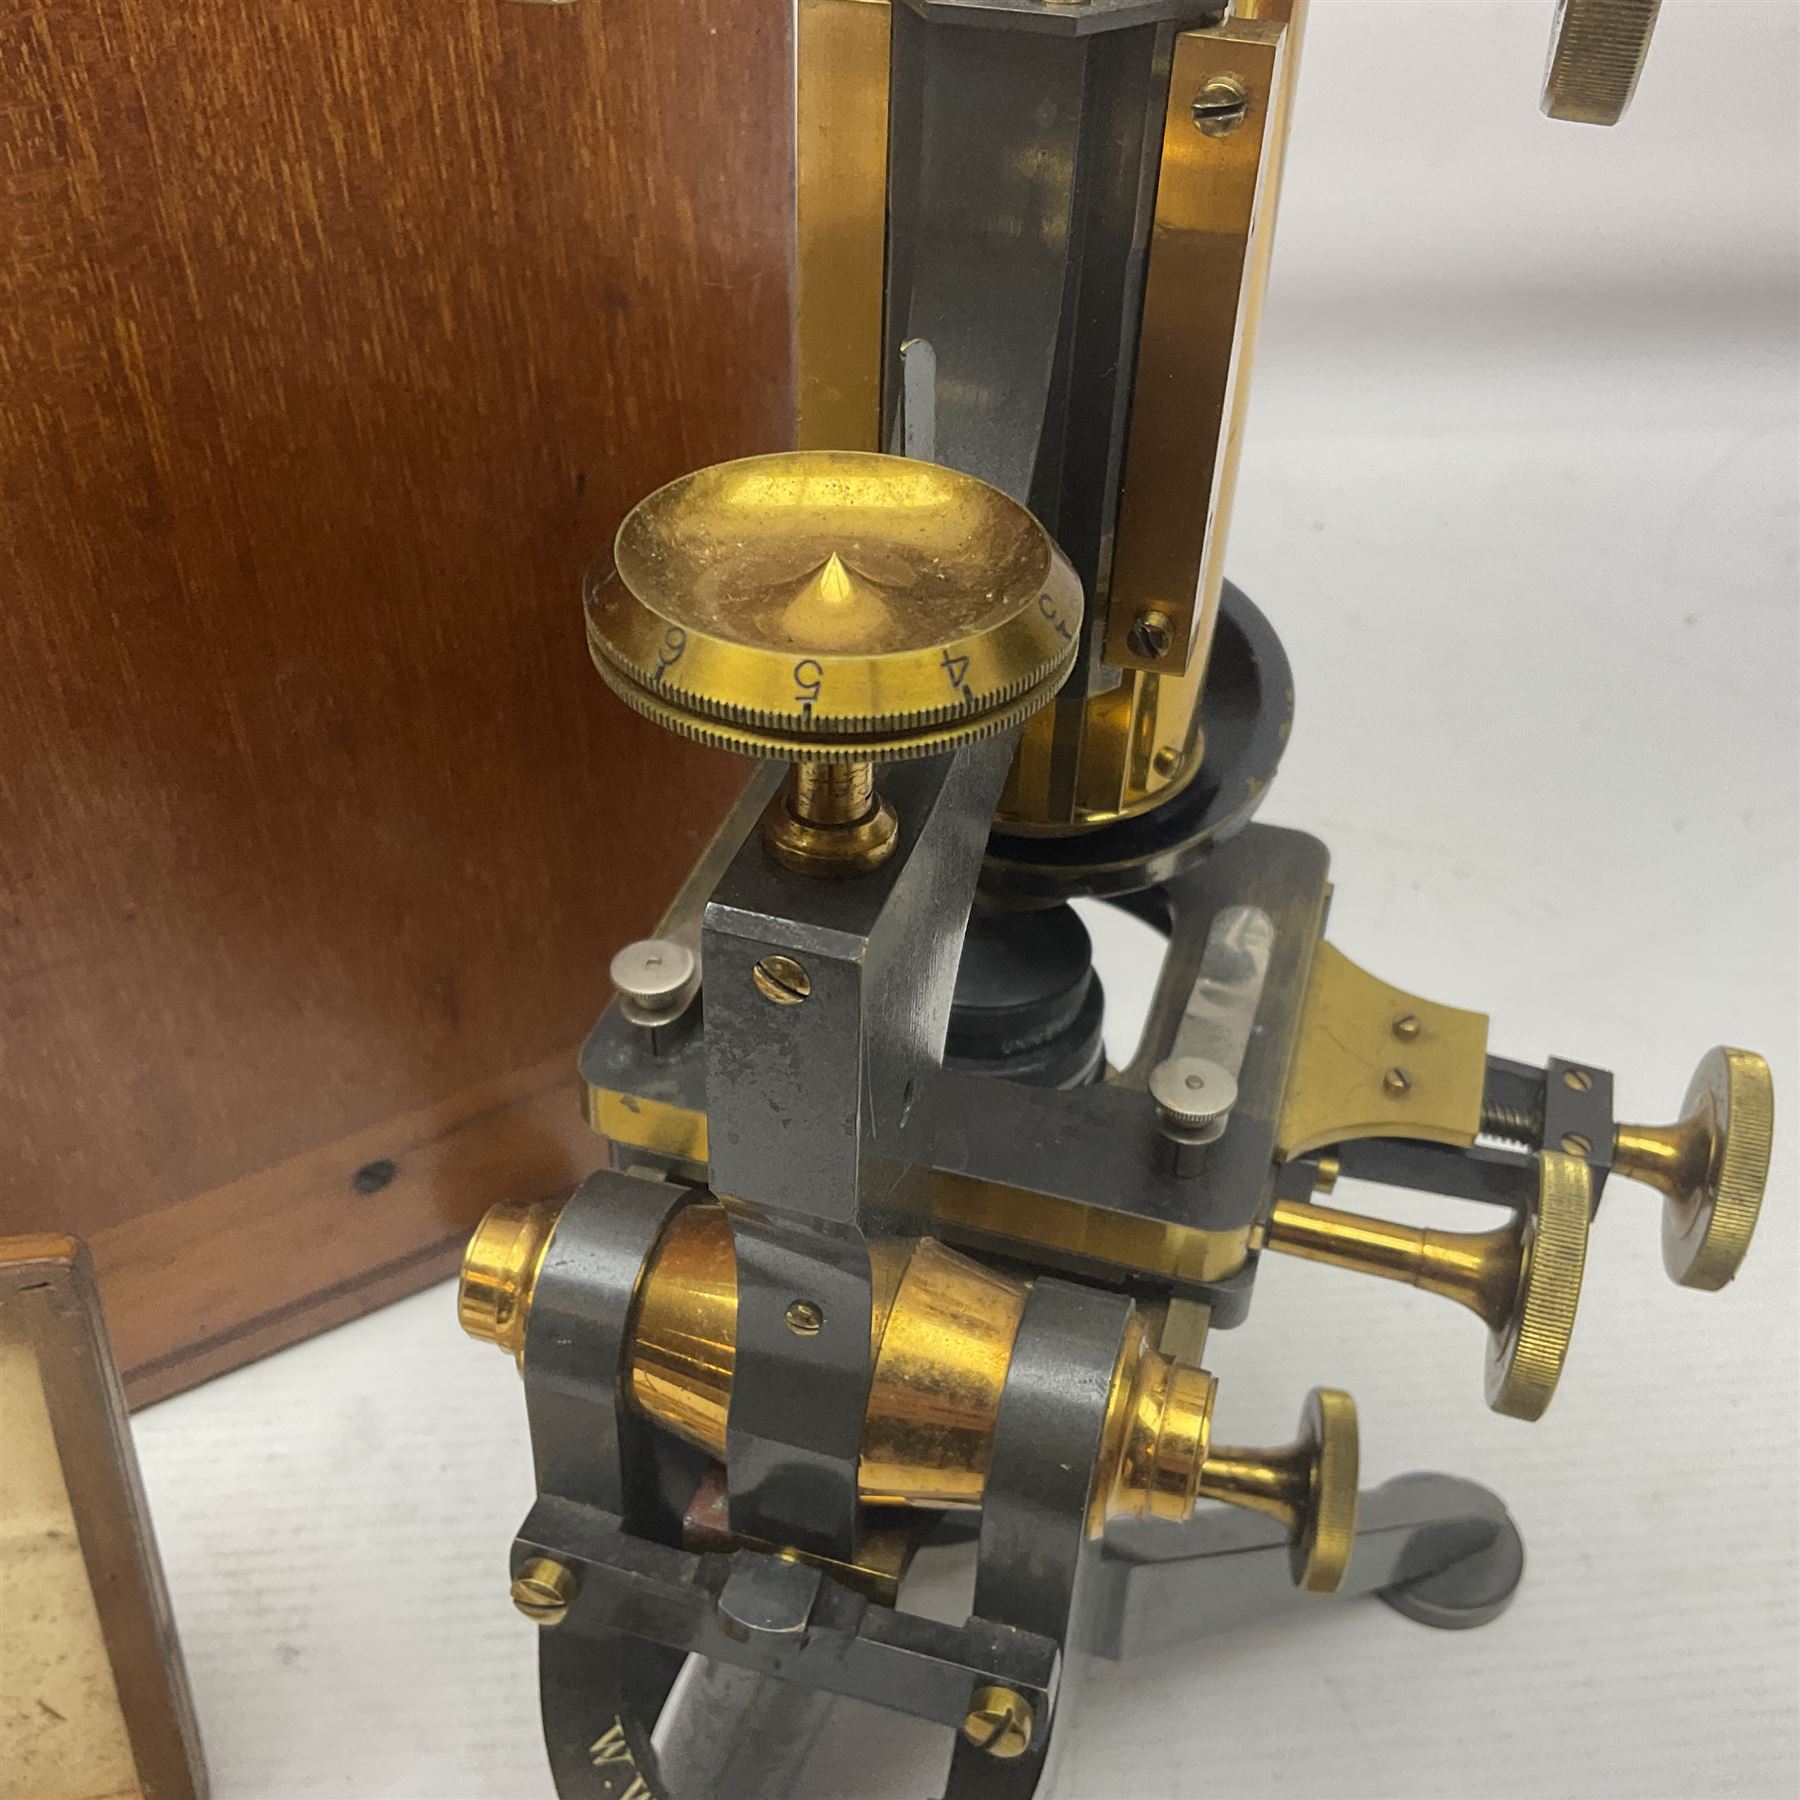 W. Watson & Sons Ltd lacquered brass compound microscope circa 1910 - Image 7 of 11